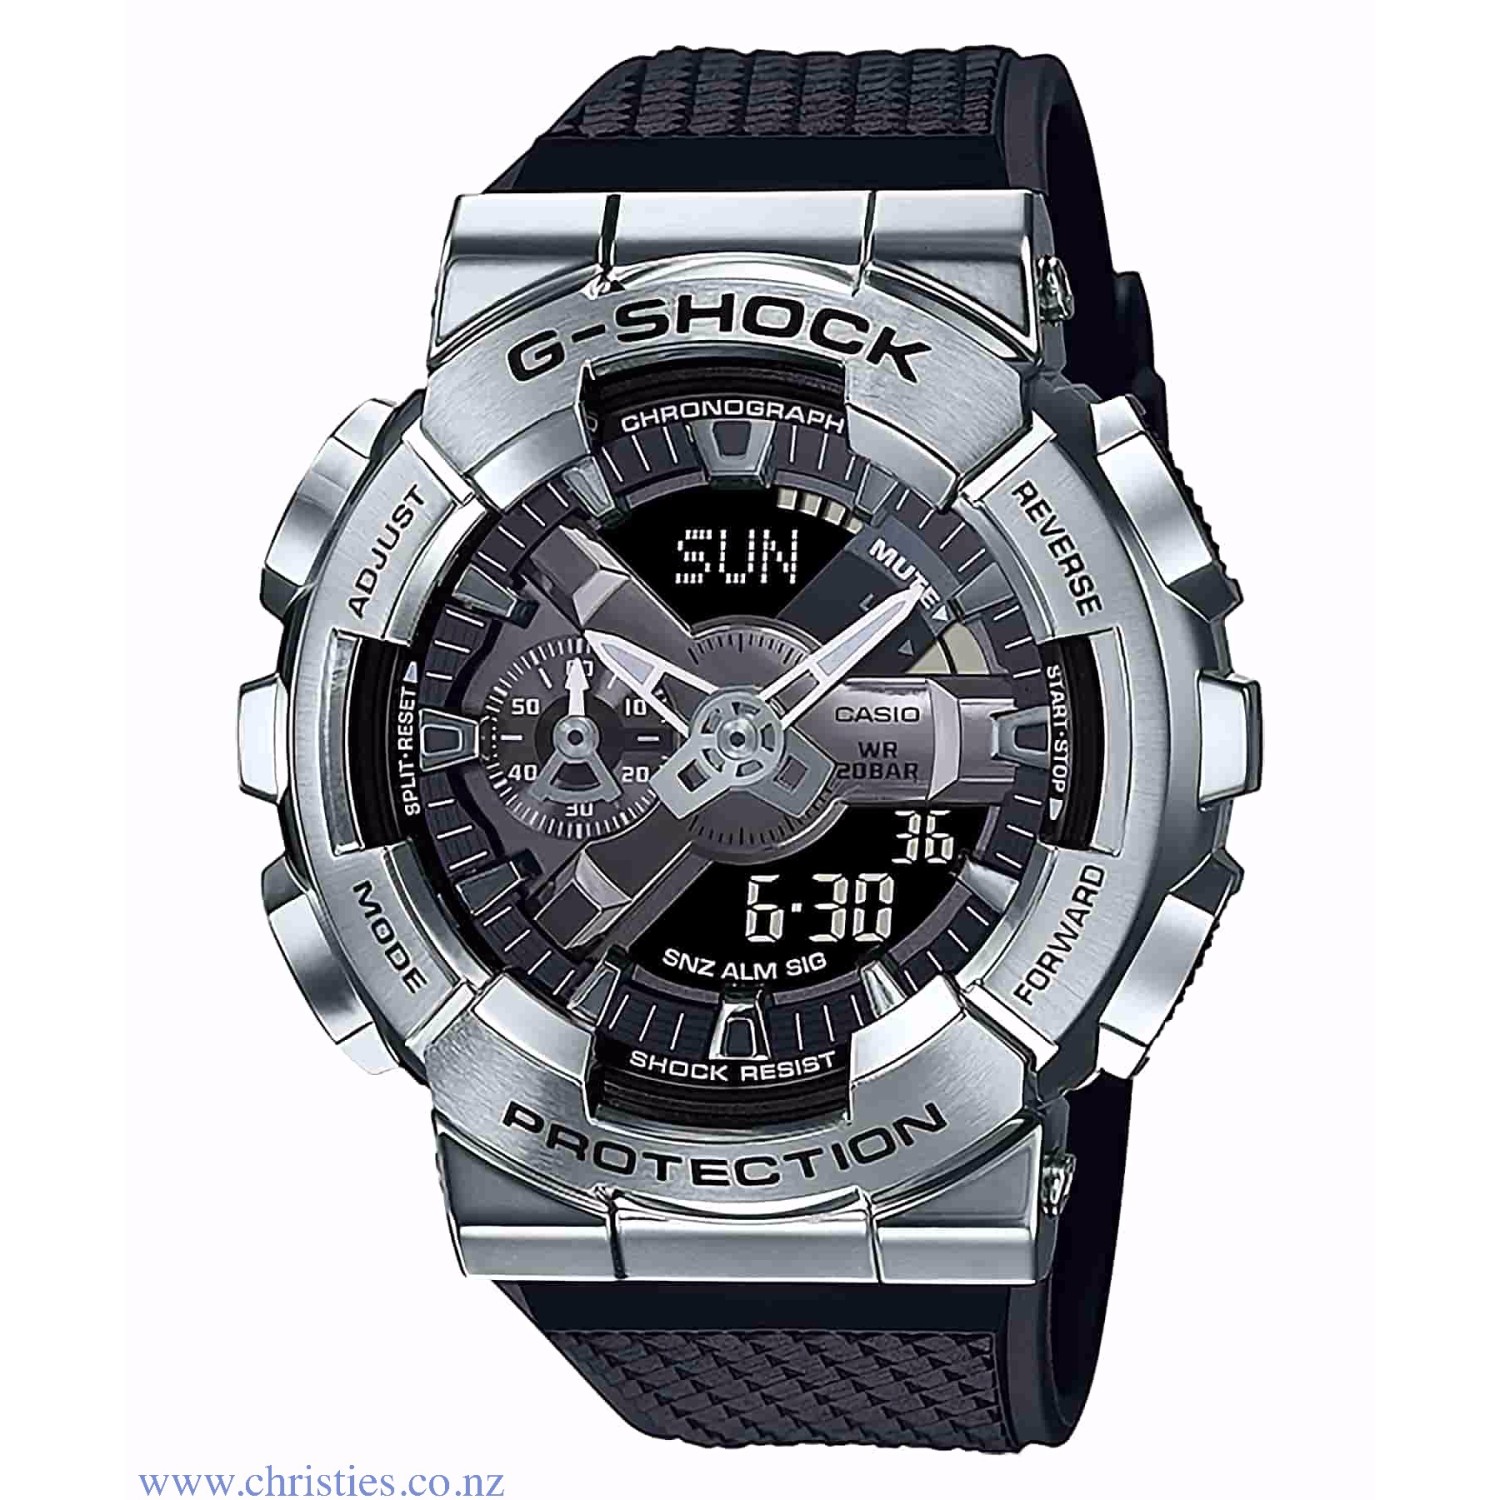 GM110-1A Casio G-Shock Stainless Steel Bezel Watch. Fresh new colour, material and finishing, with the design identity of the GA-110 fully intact. Born of a new vision to combine industrial and street sensibilities, the GM-110 hits the scene, clad in meta